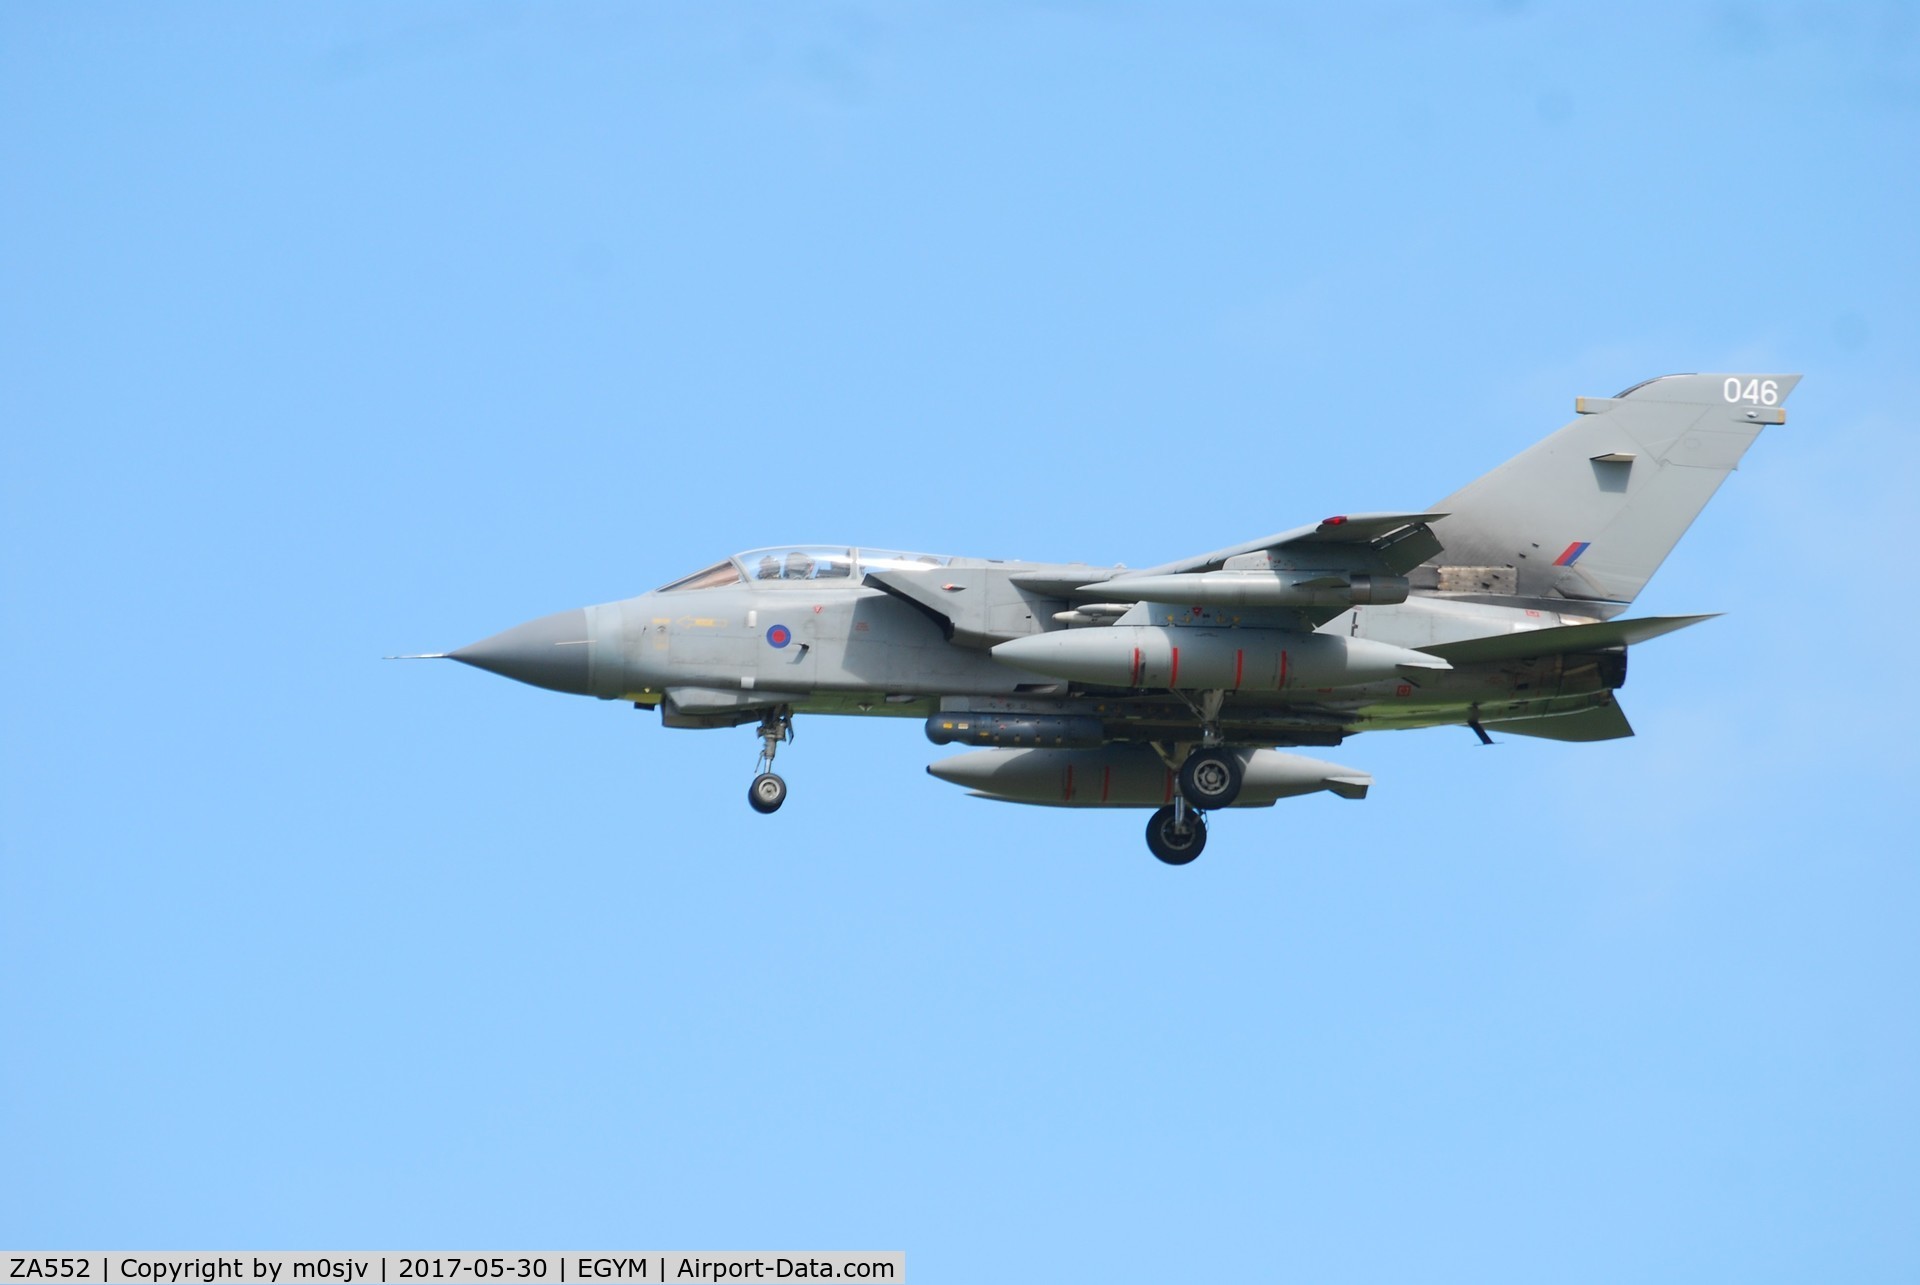 ZA552, 1981 Panavia Tornado GR.1 C/N 068/BT019/3036, Returning to Base due to a technical issue